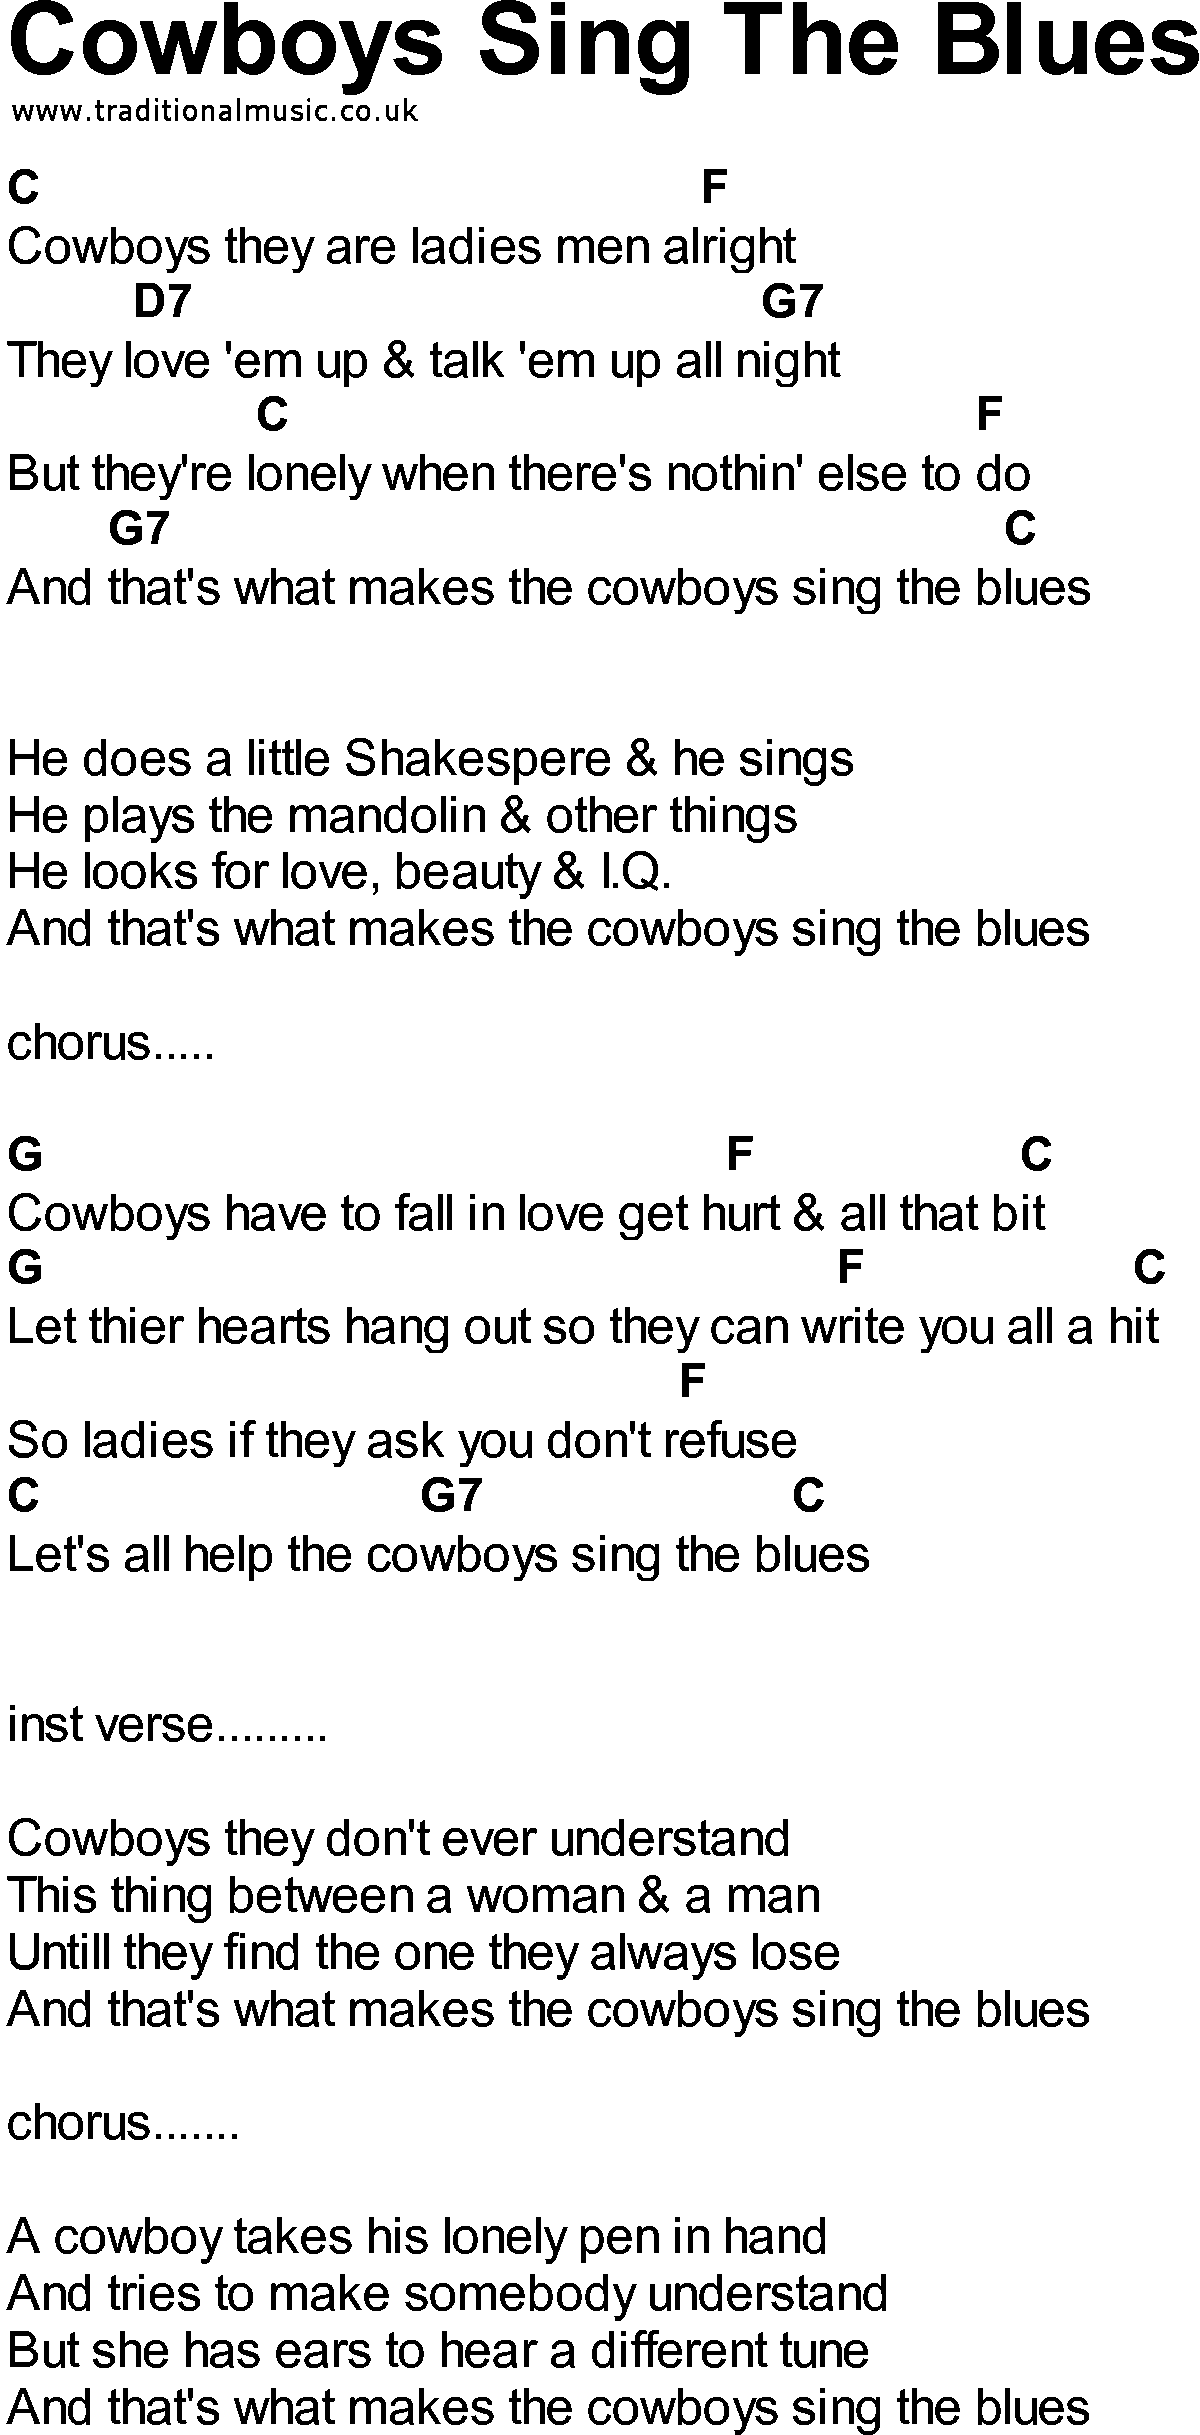 Bluegrass songs with chords - Cowboys Sing The Blues